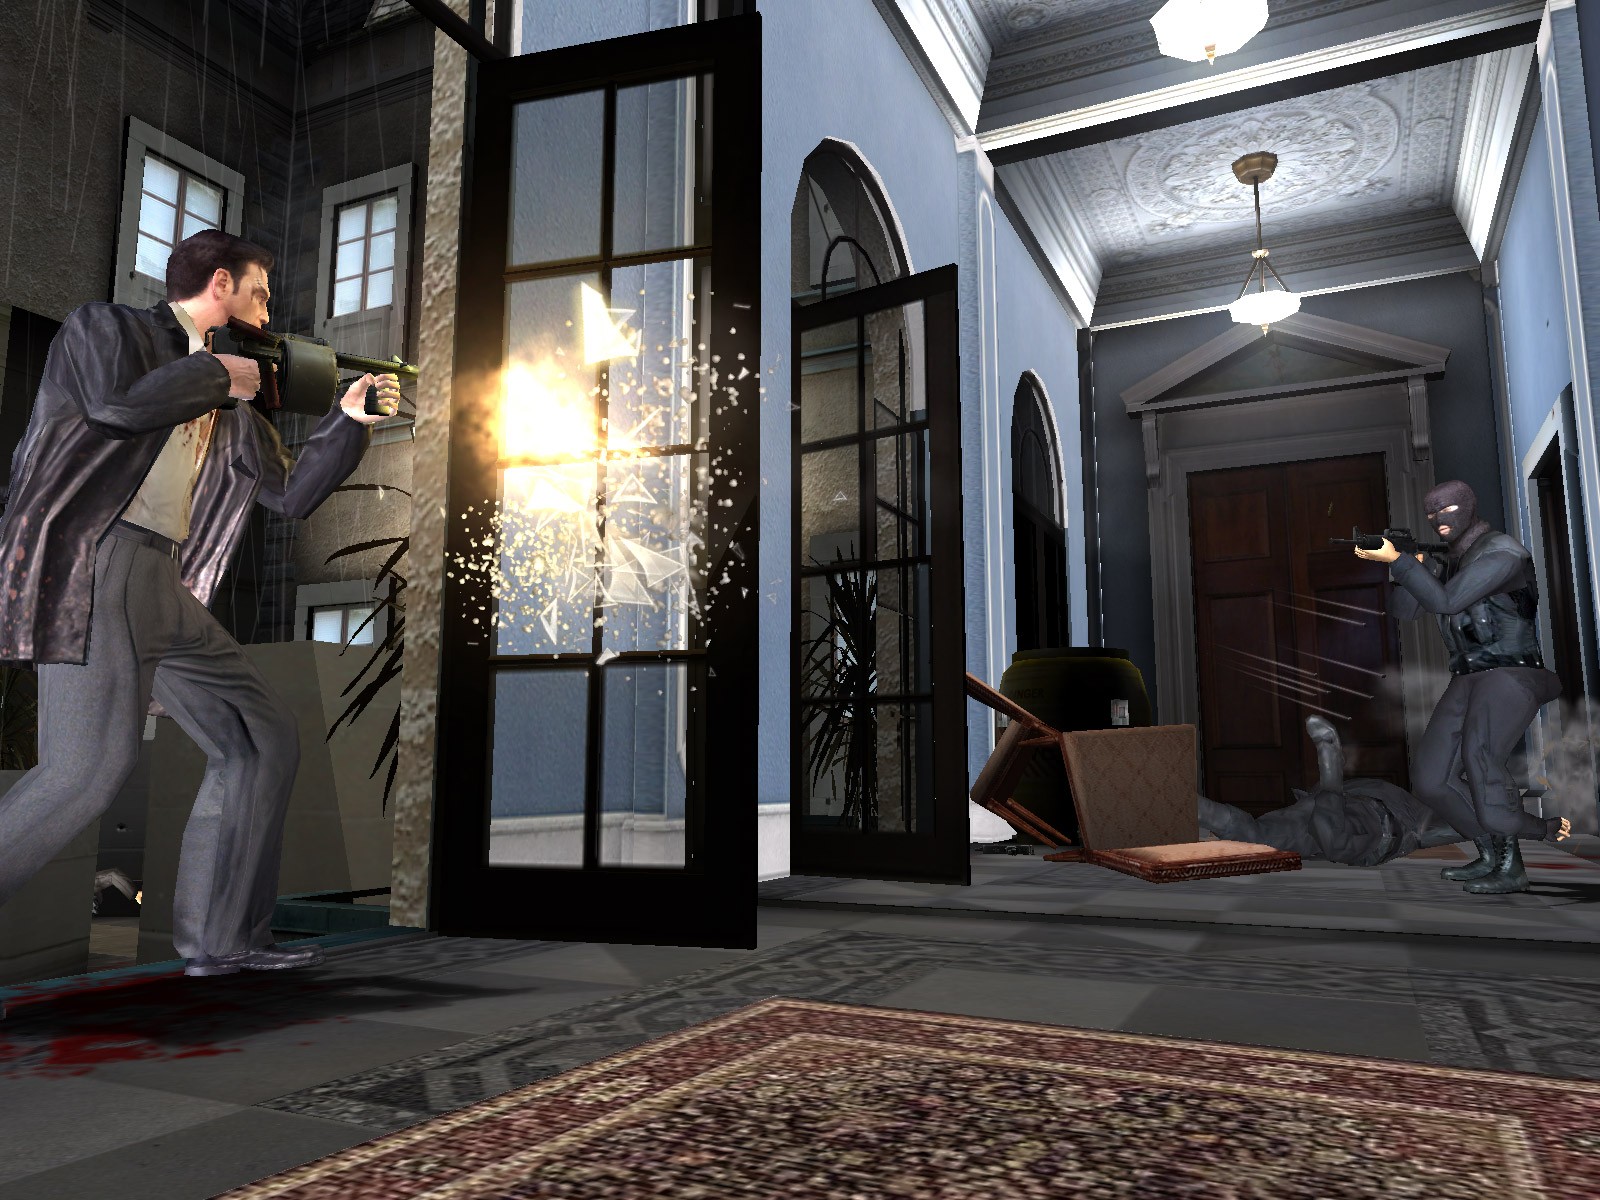 max payne 2 the fall of max payne torrent